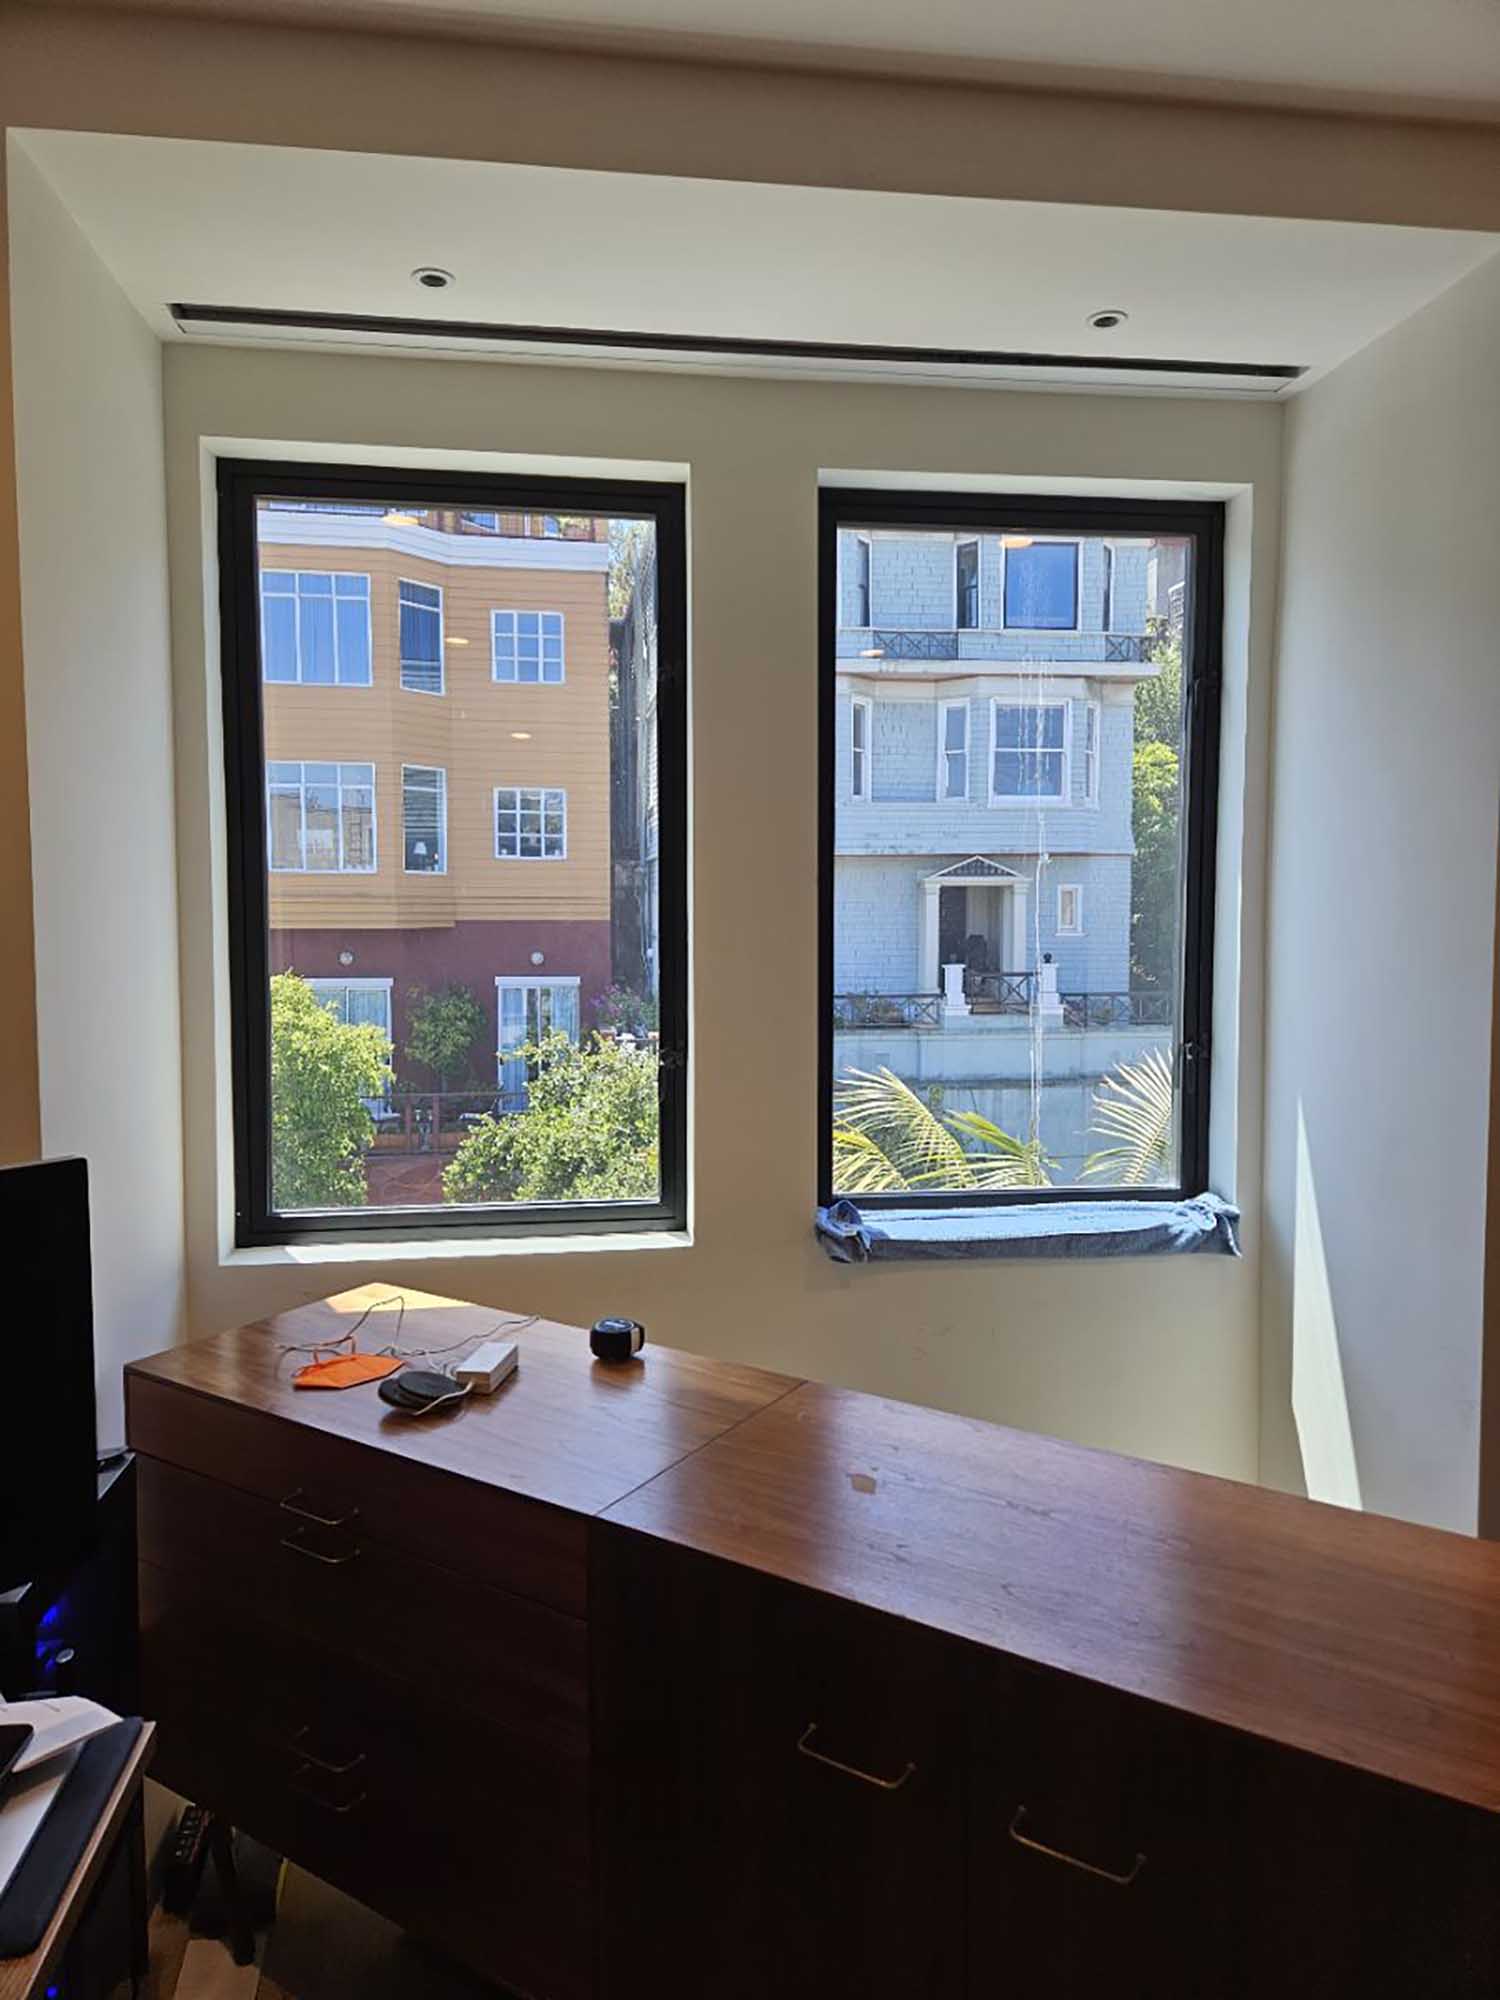 If you are looking for an affordable and effective window film that gives you great sun control and comfort, the 3M Affinity Series window films might be the right choice for you. Installed by ClimatePro.